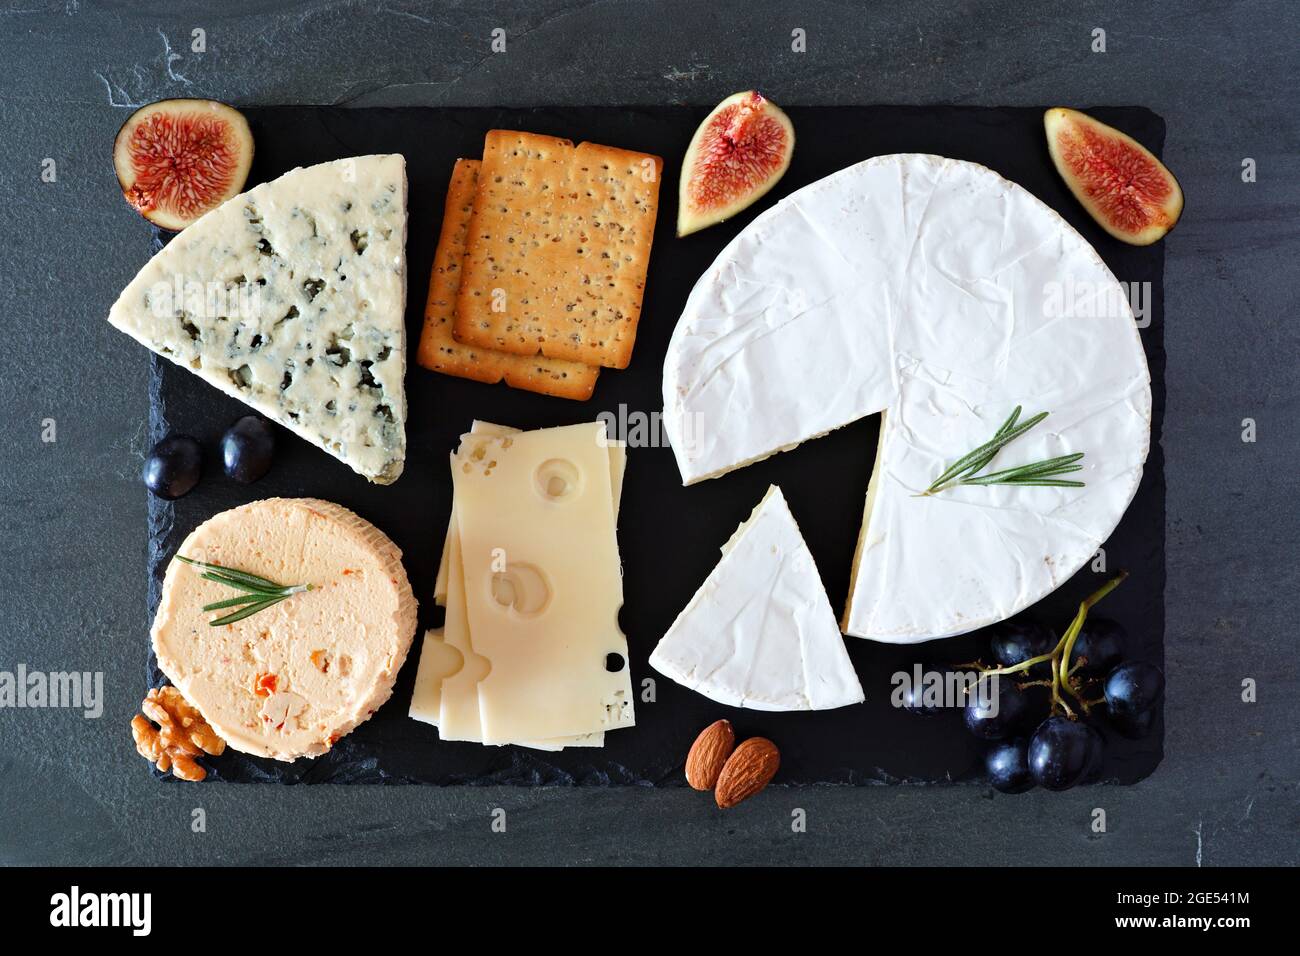 Cheese board with a selection of cheeses, crackers, figs and nuts on slate serving board. Above view on a dark background. Stock Photo